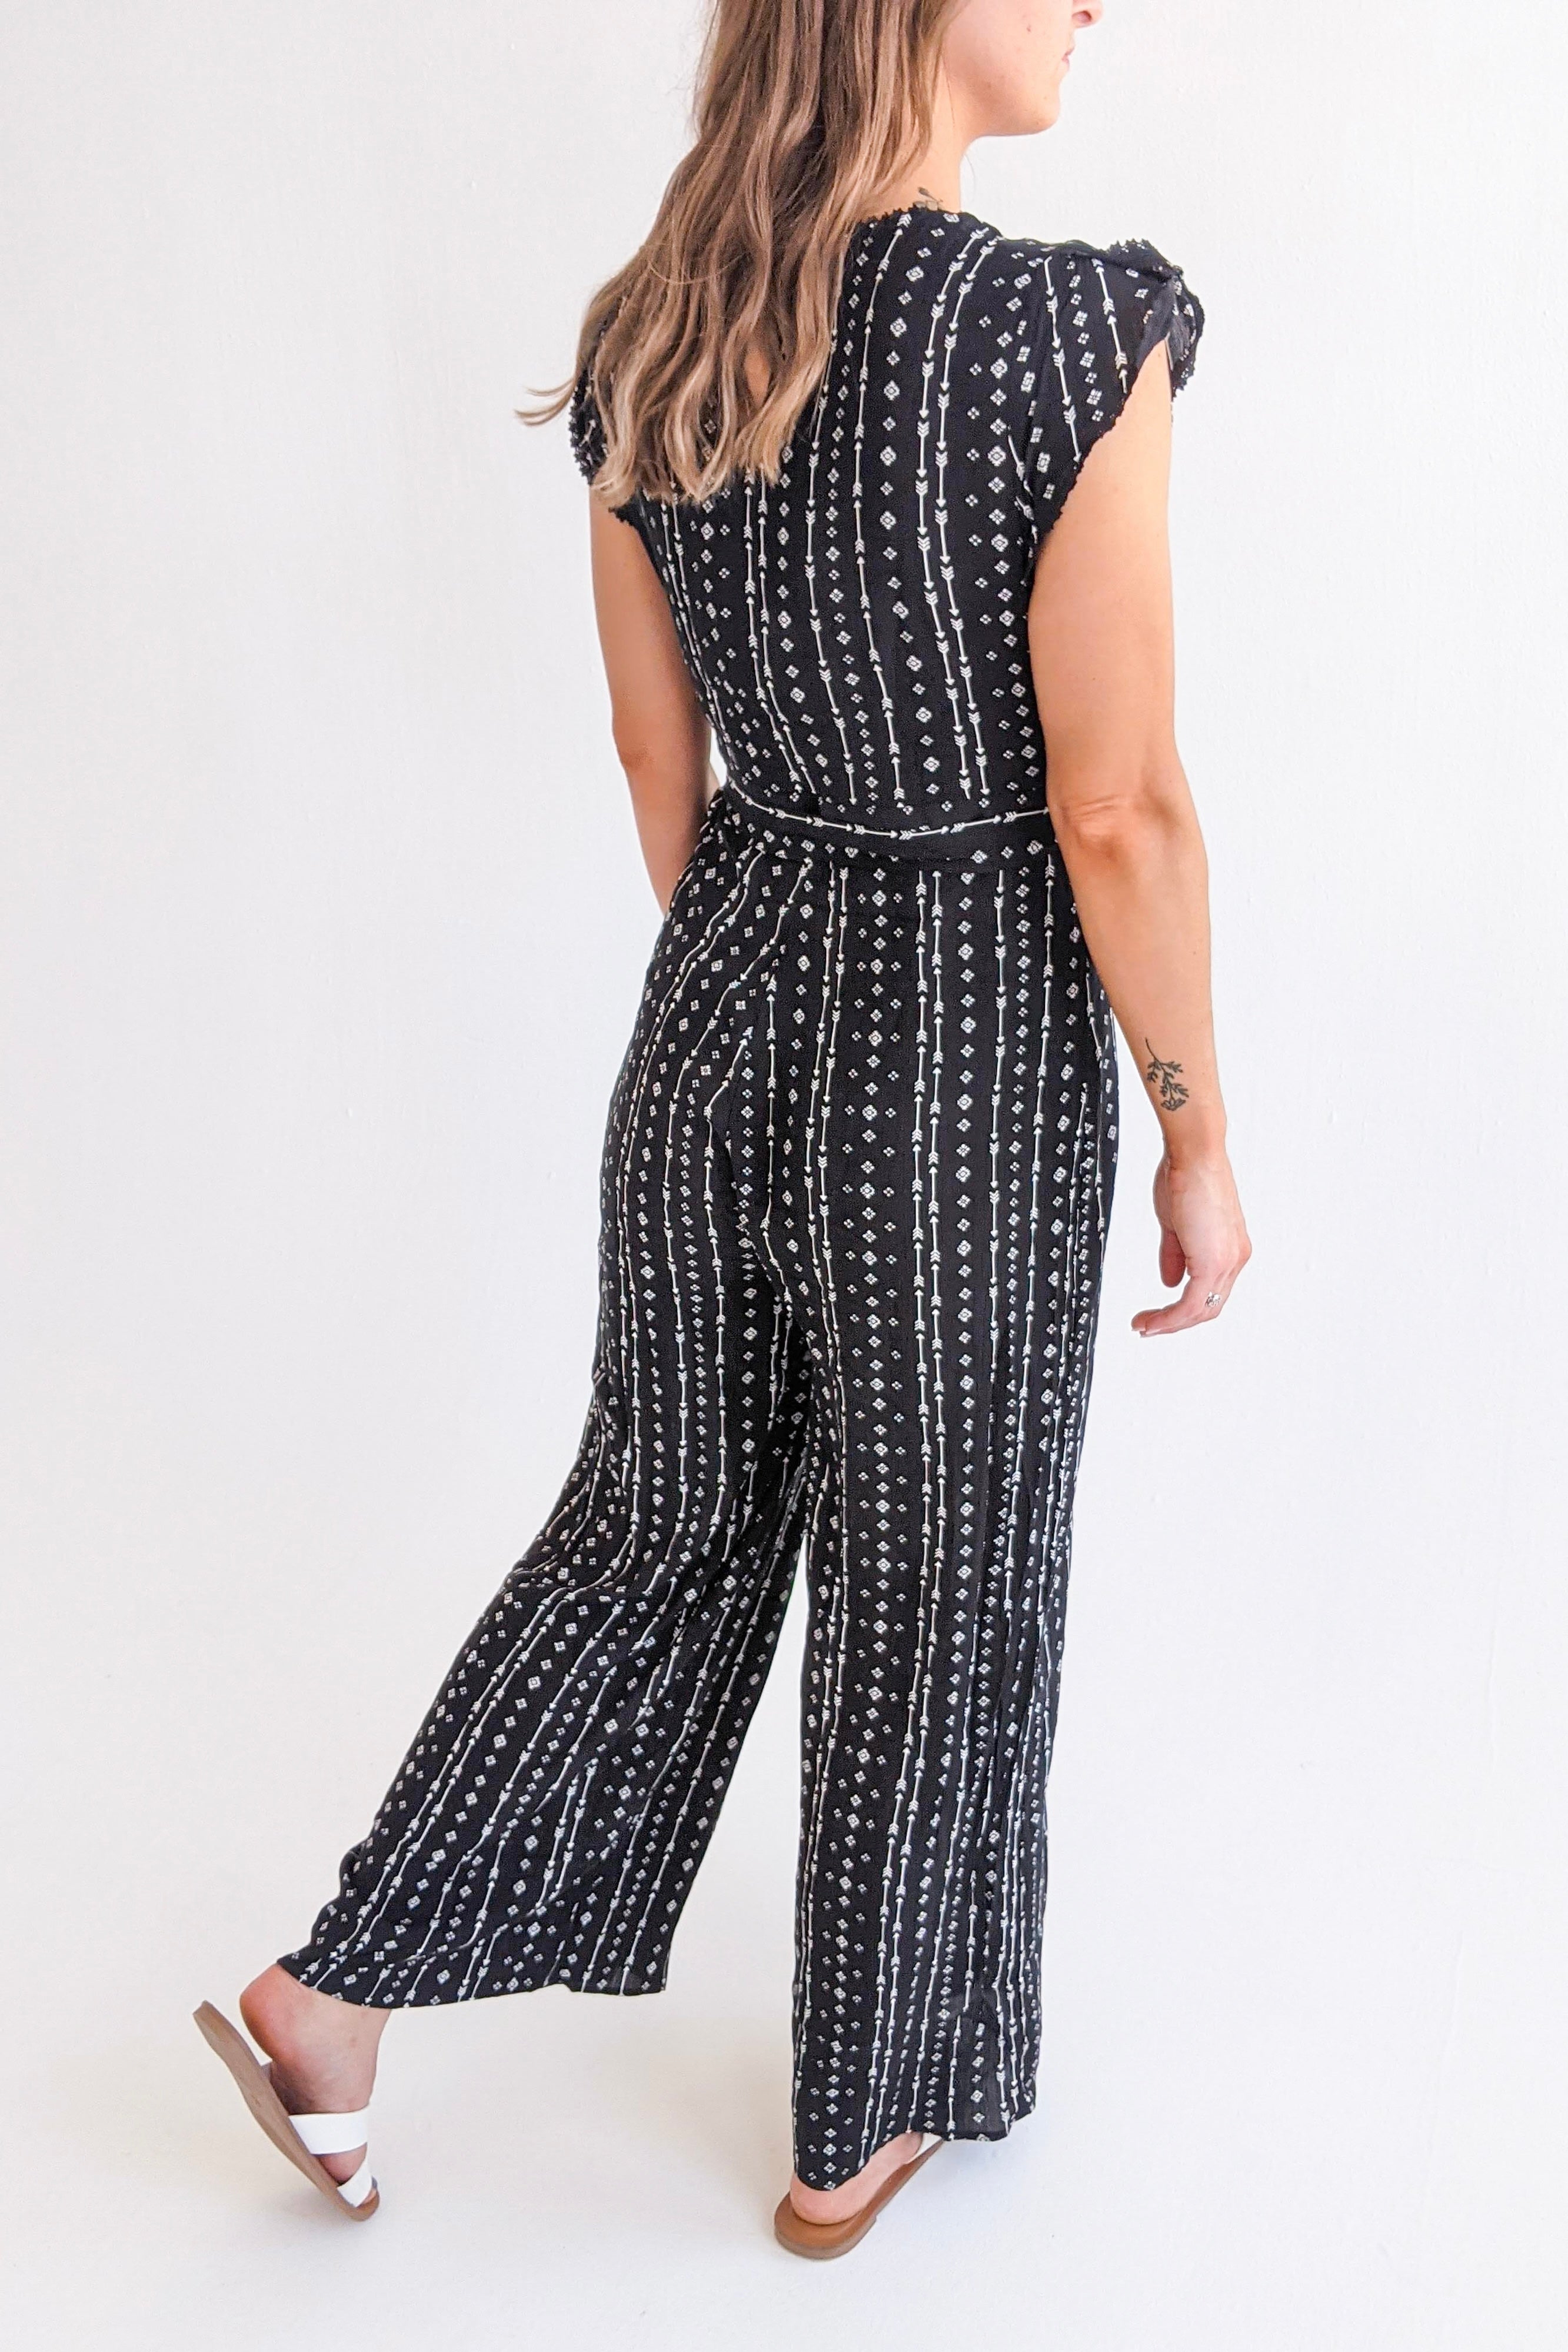 17 Easy, Stylish Jumpsuits You Can Wear to Work